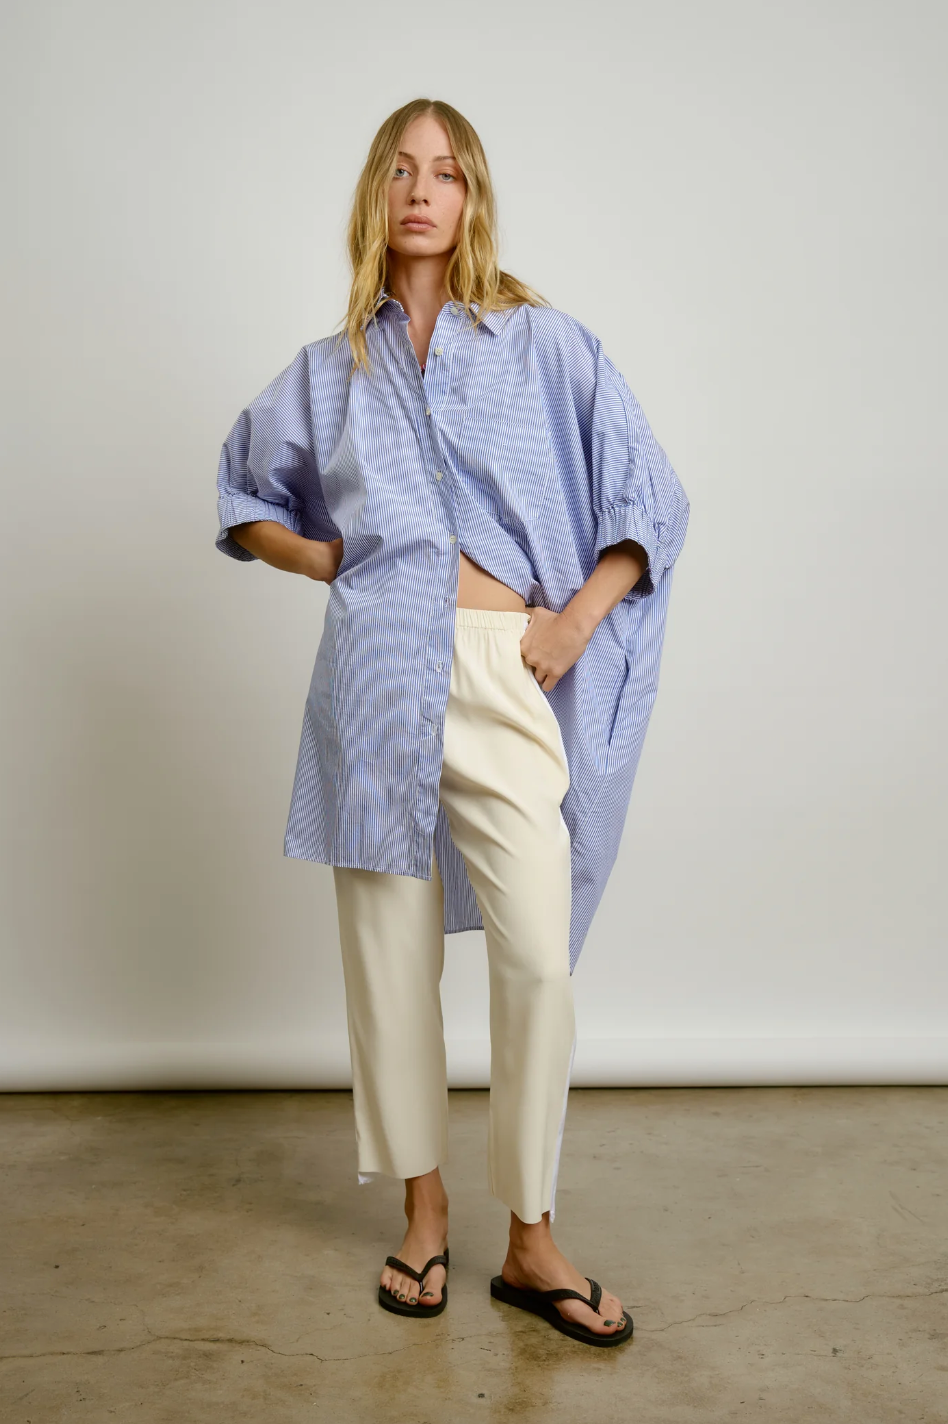 A woman stands in a studio in Scottsdale, Arizona, wearing a blue oversized striped Le Shirt from Aquarius Cocktail and cream trousers, paired with black sandals. She has a relaxed pose with one hand on her hip and a neutral expression.